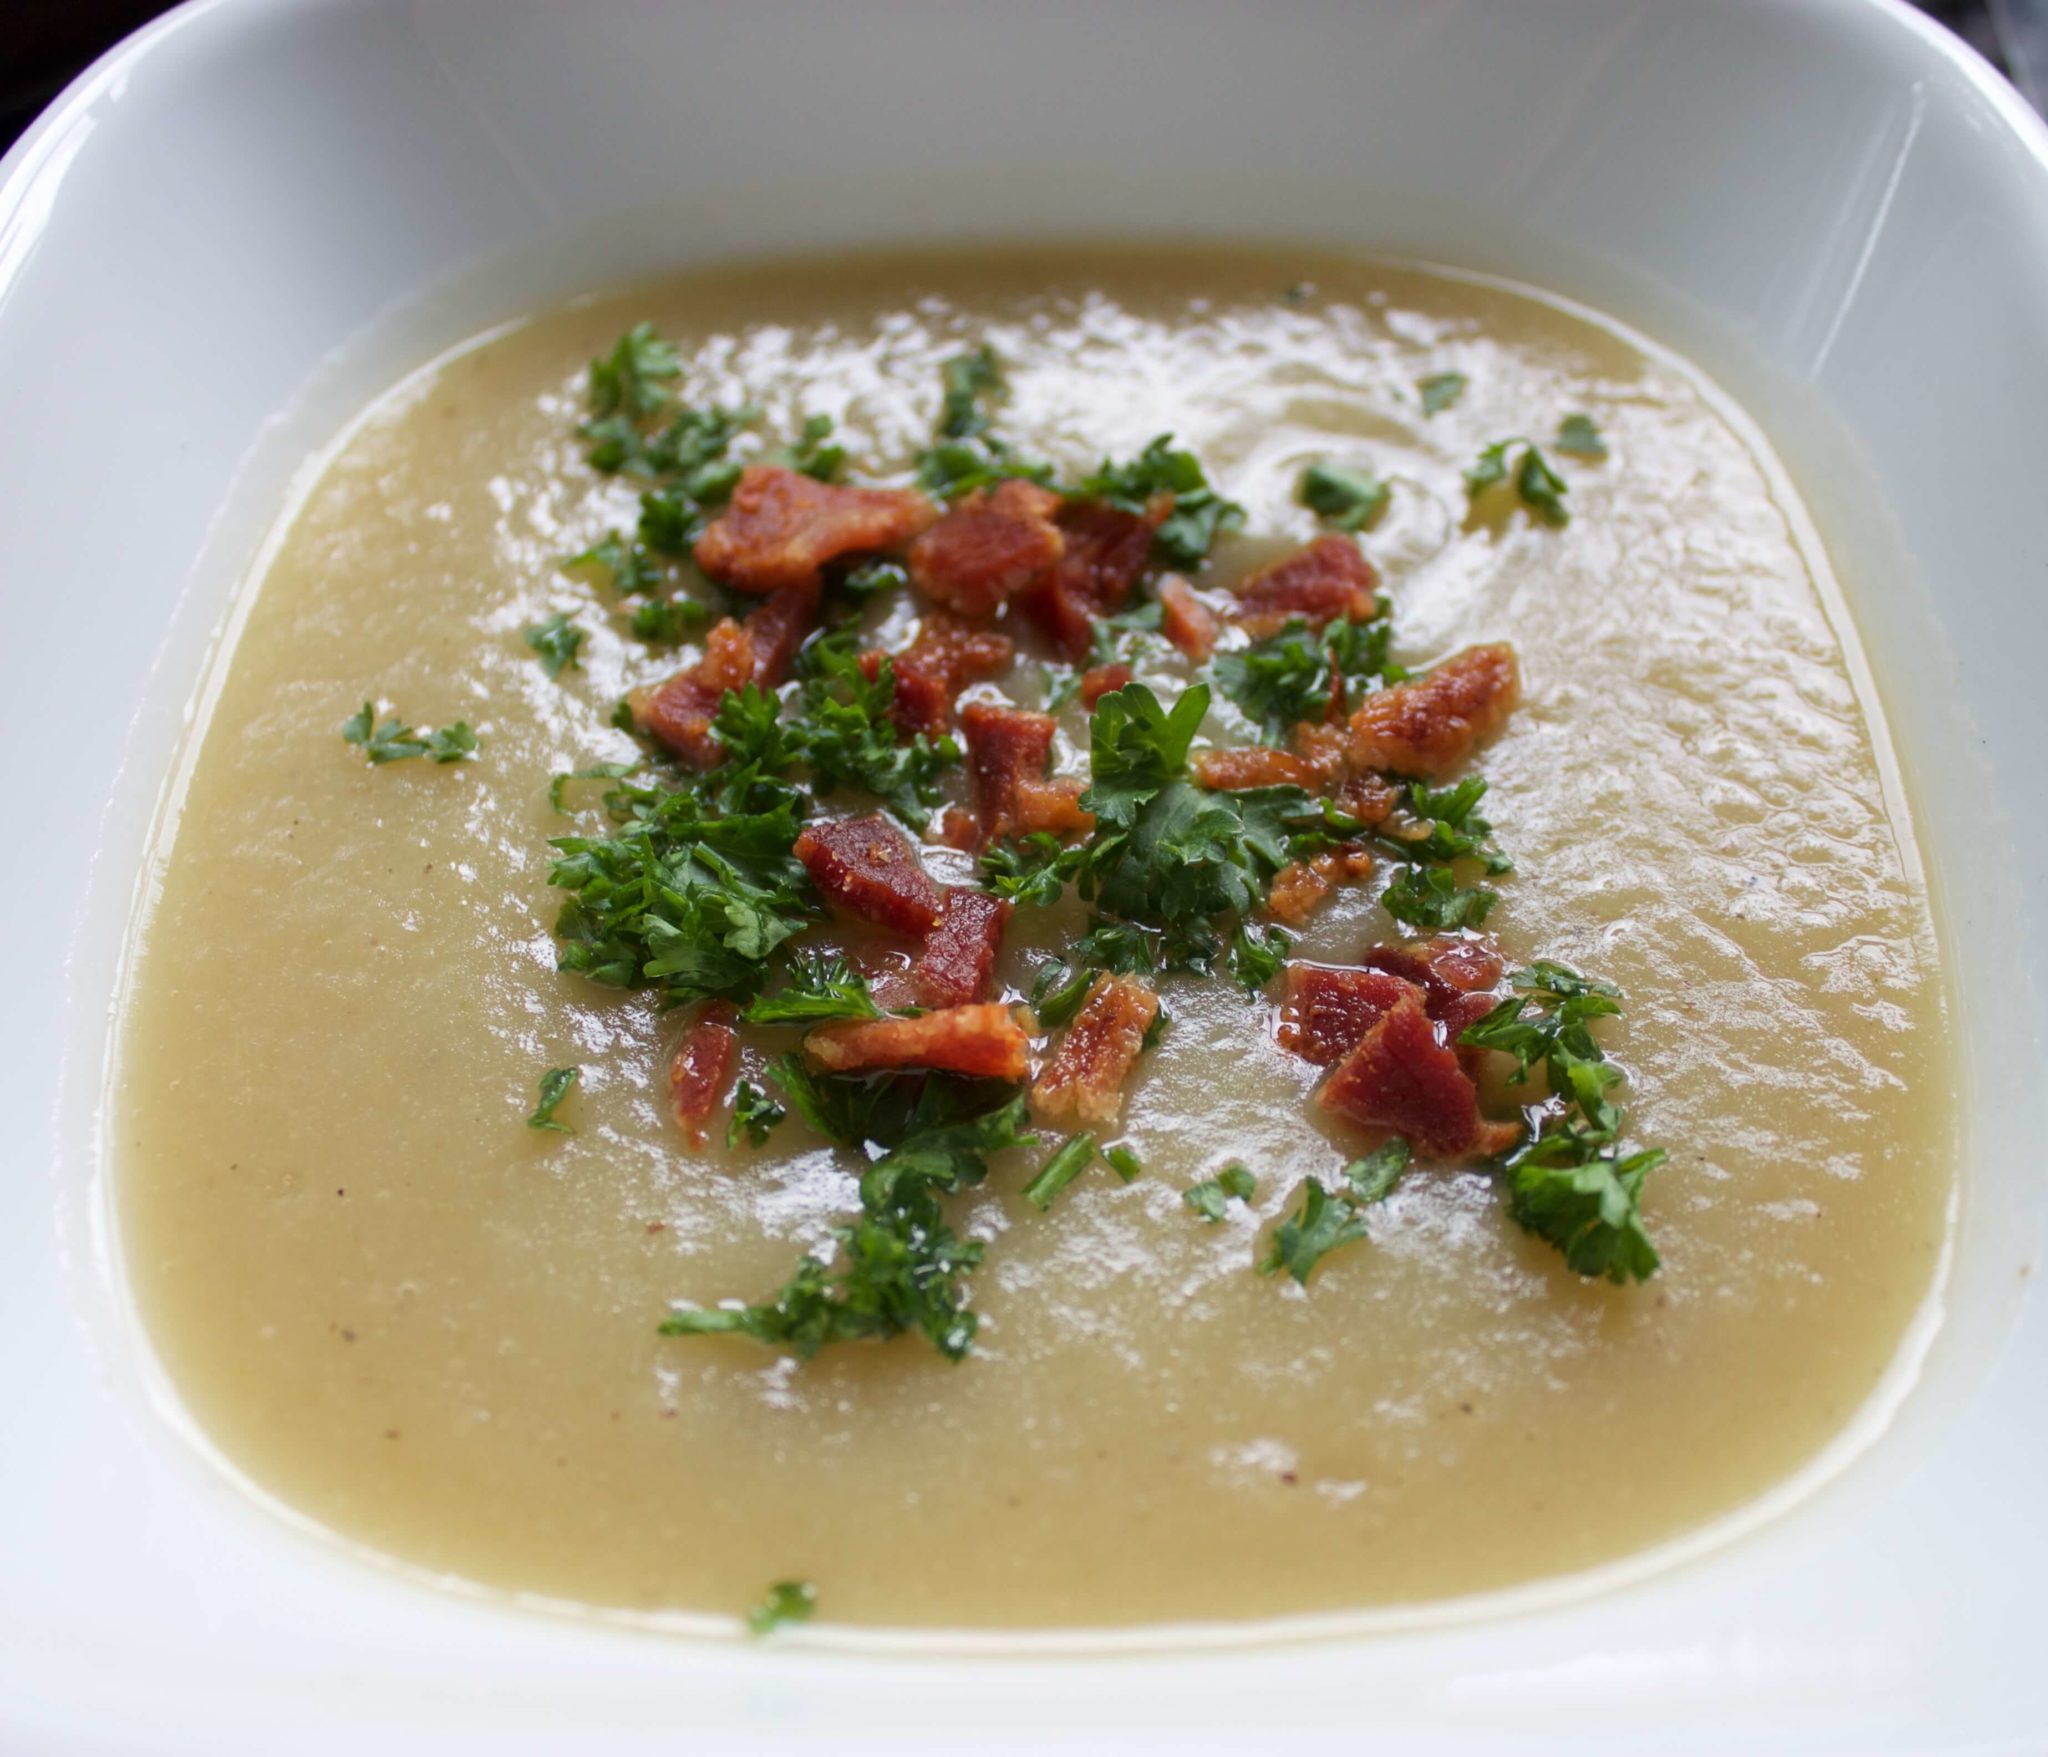 Slow Cooker Celery Soup with Bacon